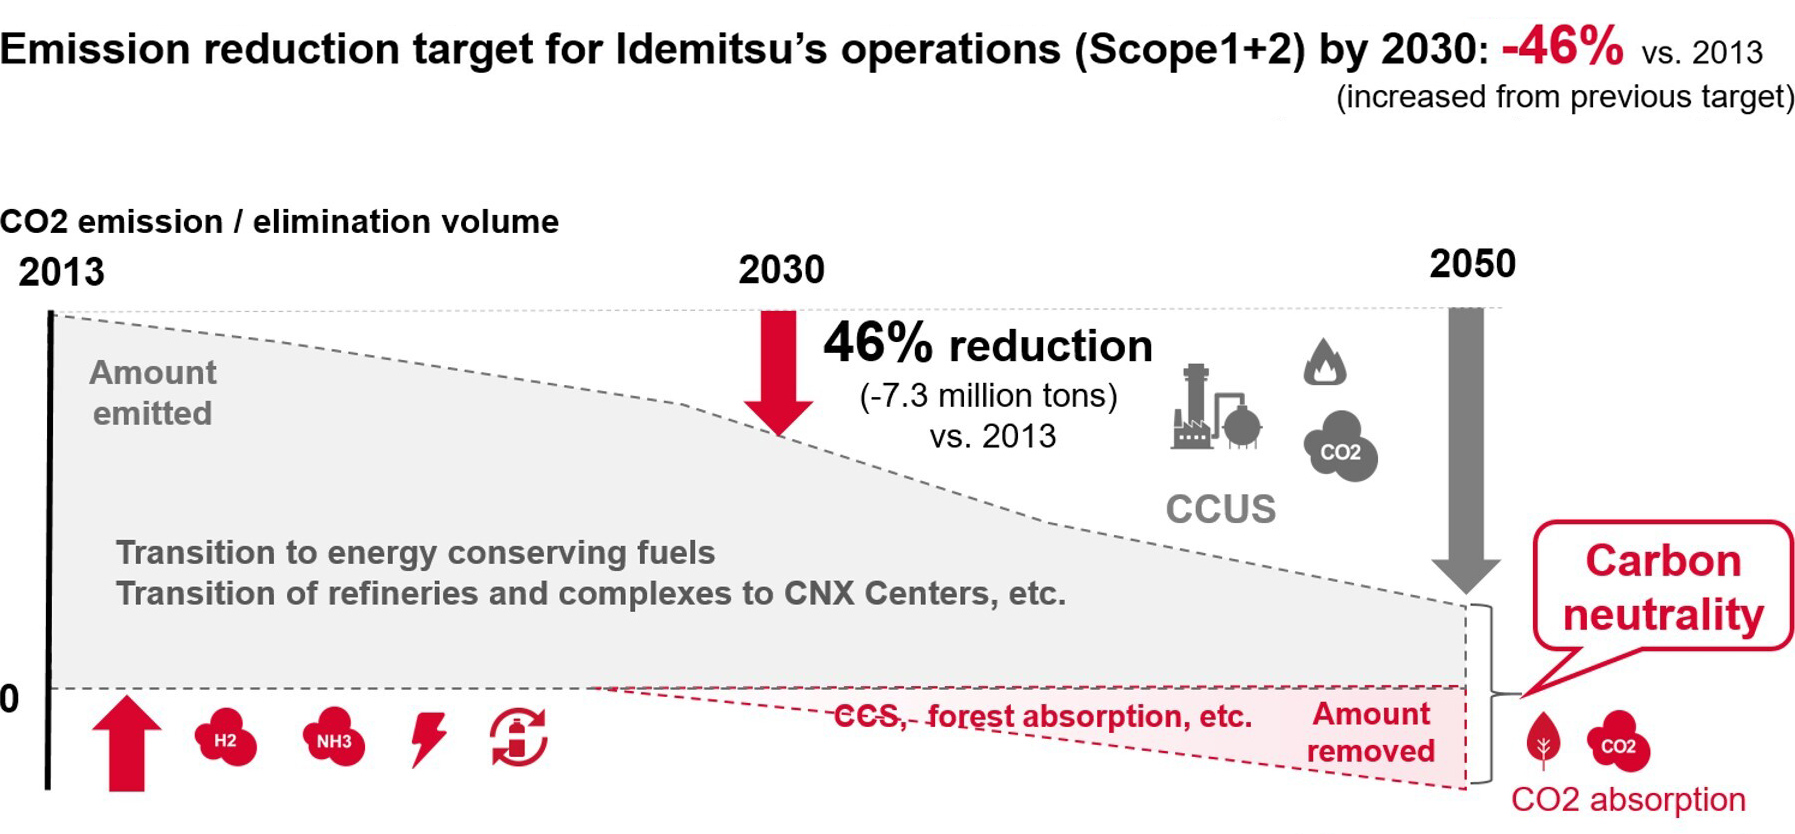 Emission reducation target for Idemitsu's operations